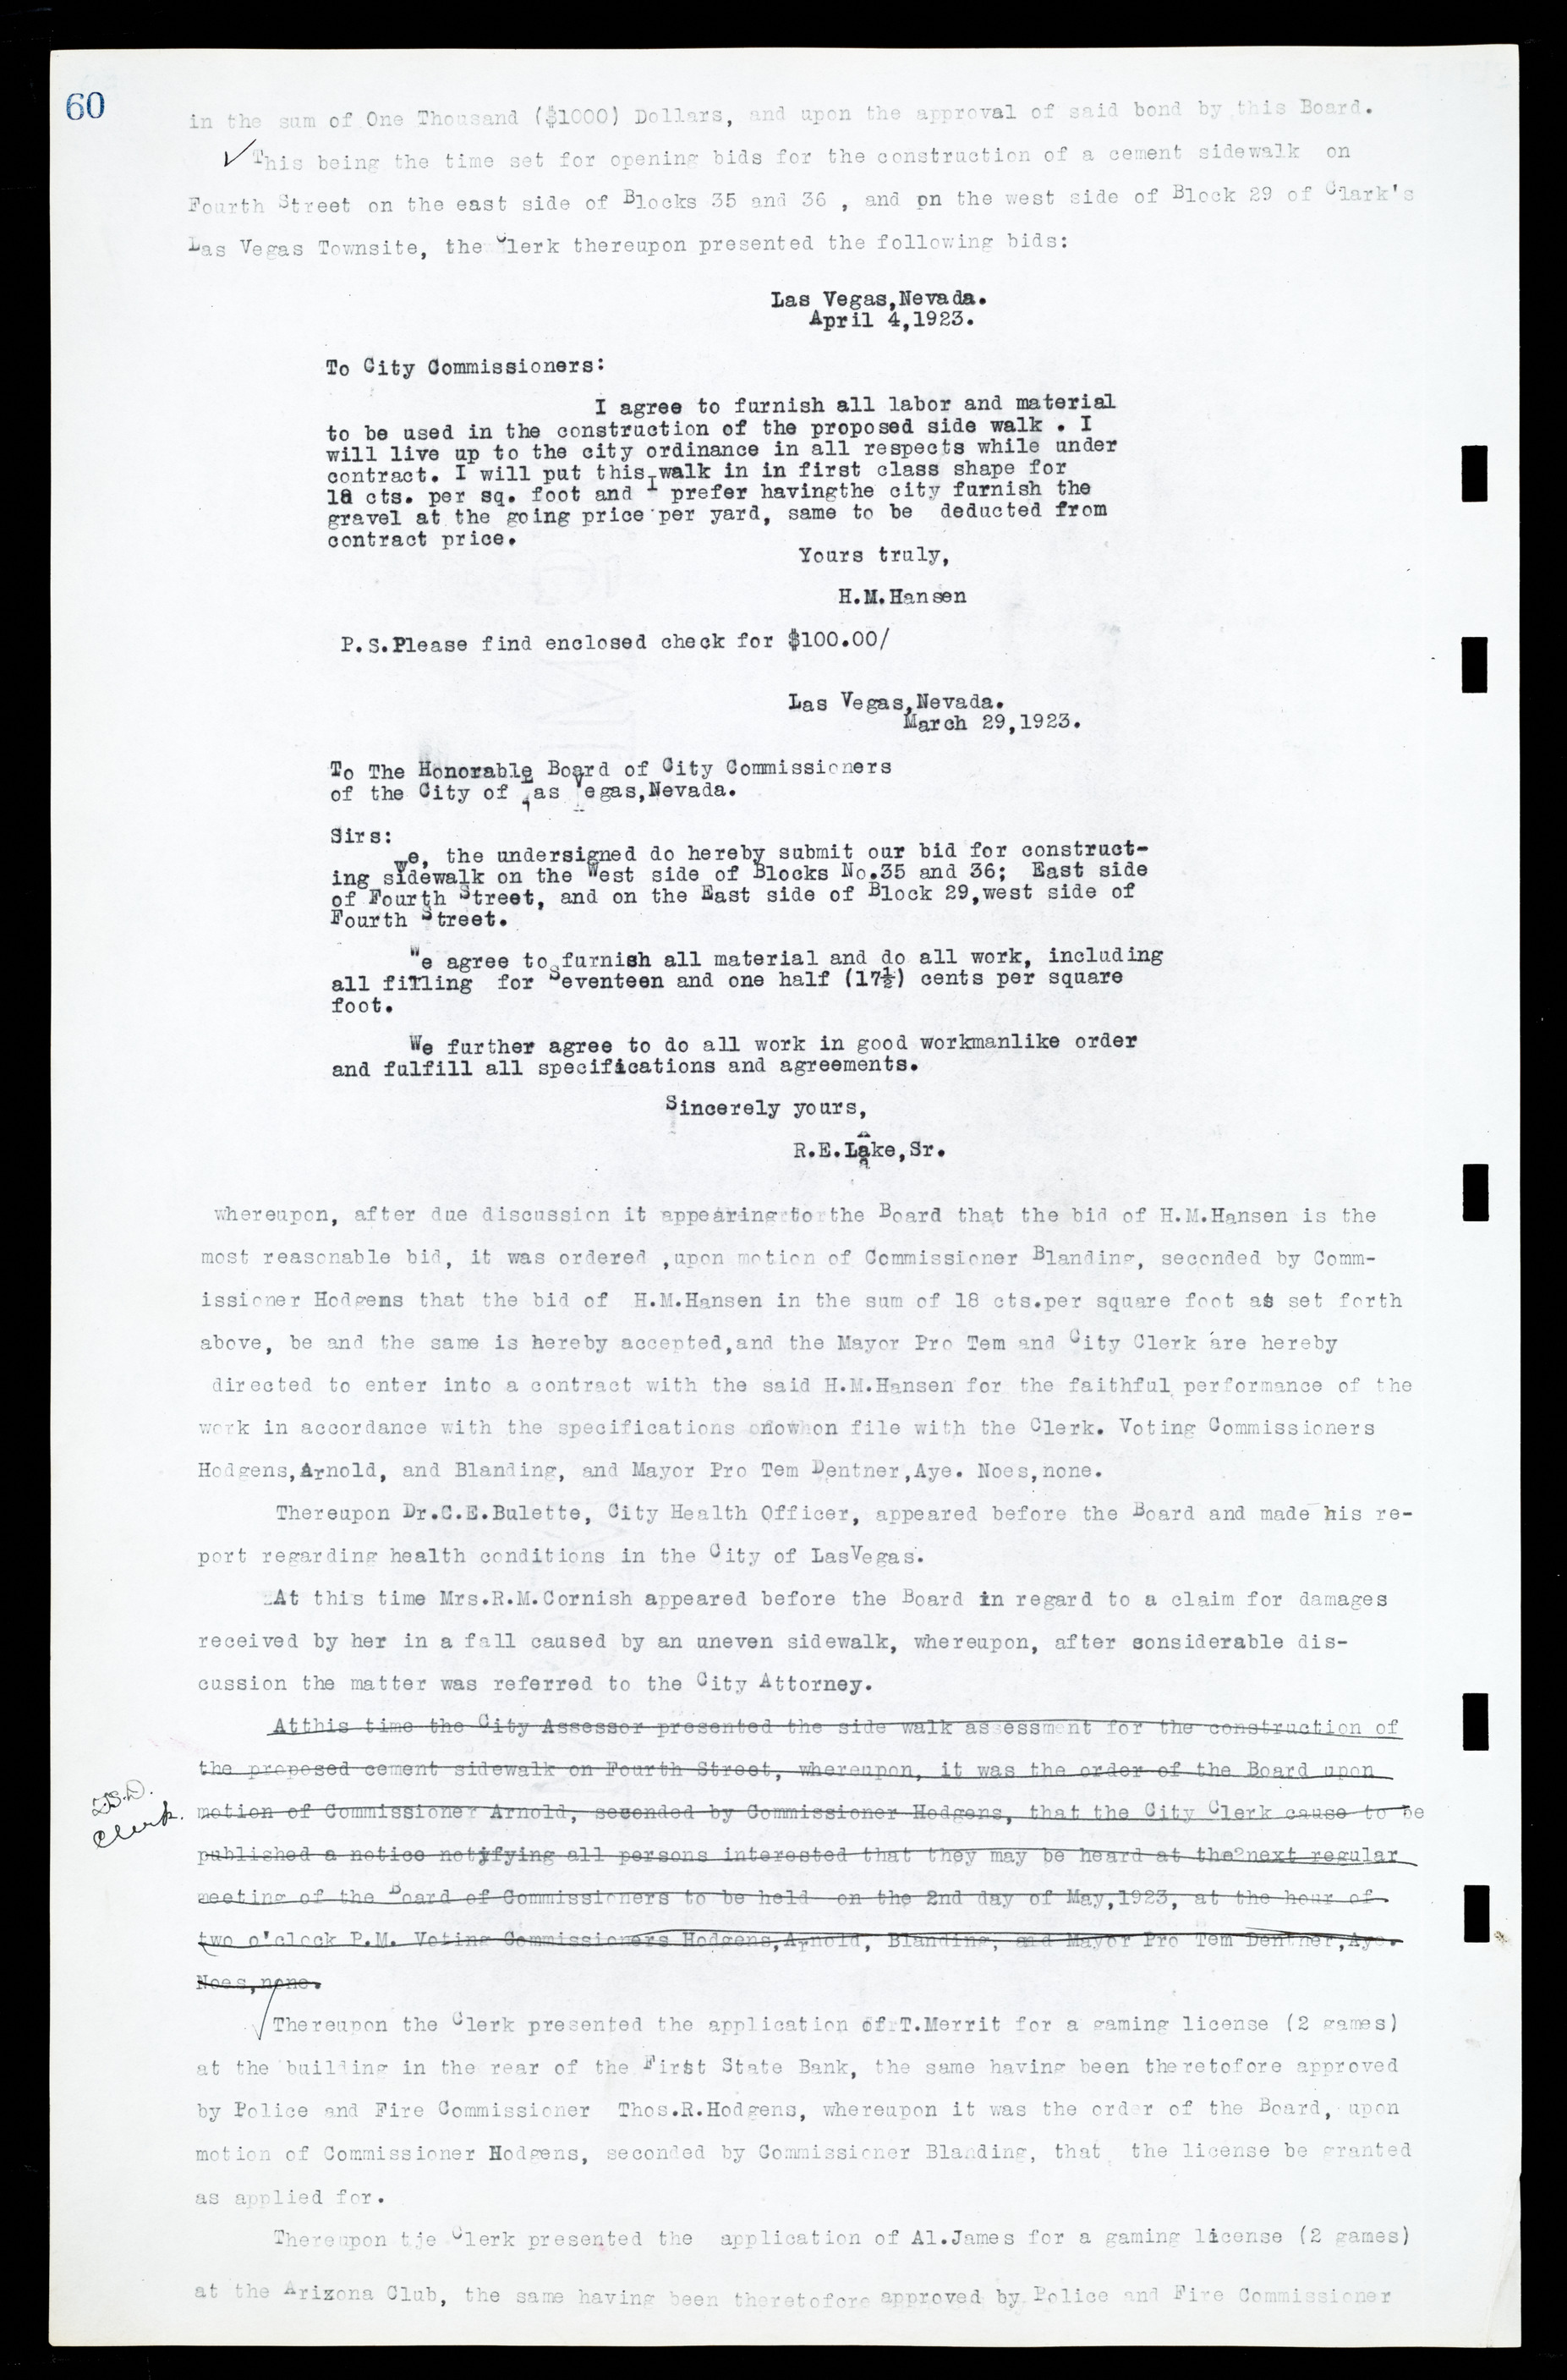 Las Vegas City Commission Minutes, March 1, 1922 to May 10, 1929, lvc000002-67